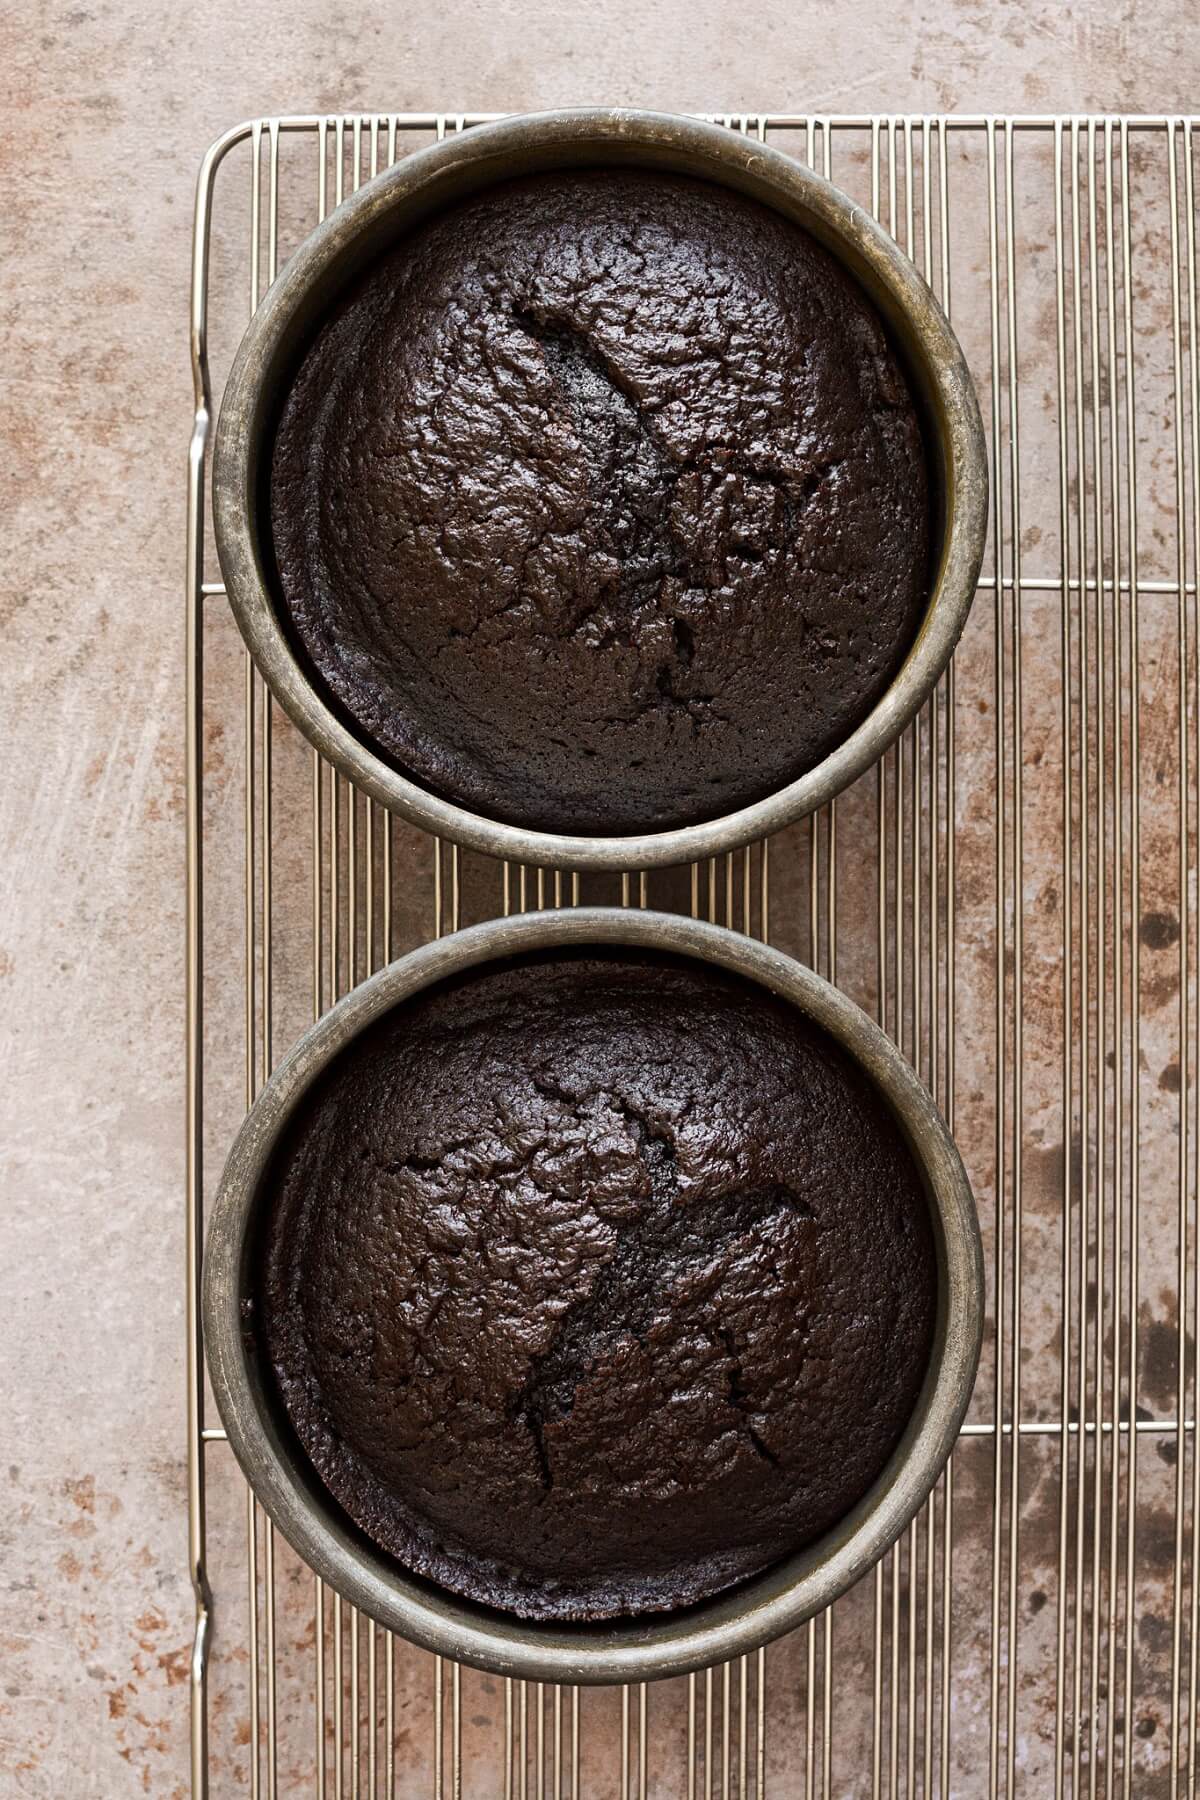 Chocolate cake cooling on a cooling rack.